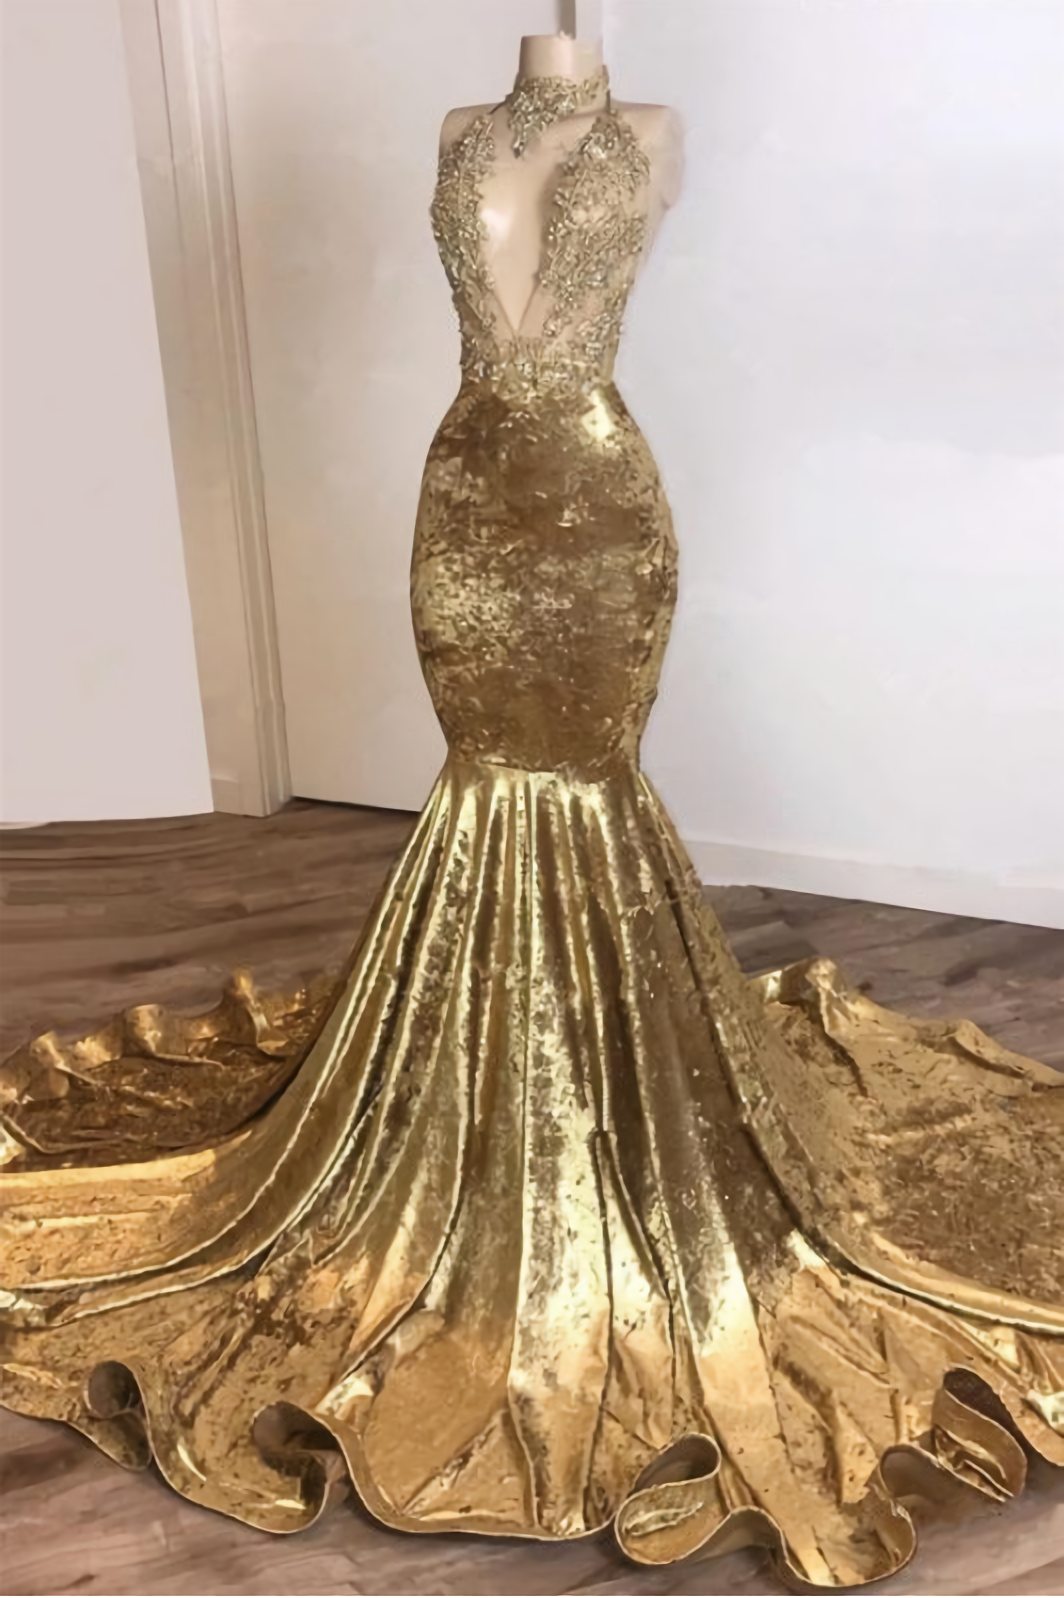 Party Dress Silk, Halter Backless Gold Prom Dresses, Cheap With Beads Appliques Mermaid Velvet Sexy Evening Gowns